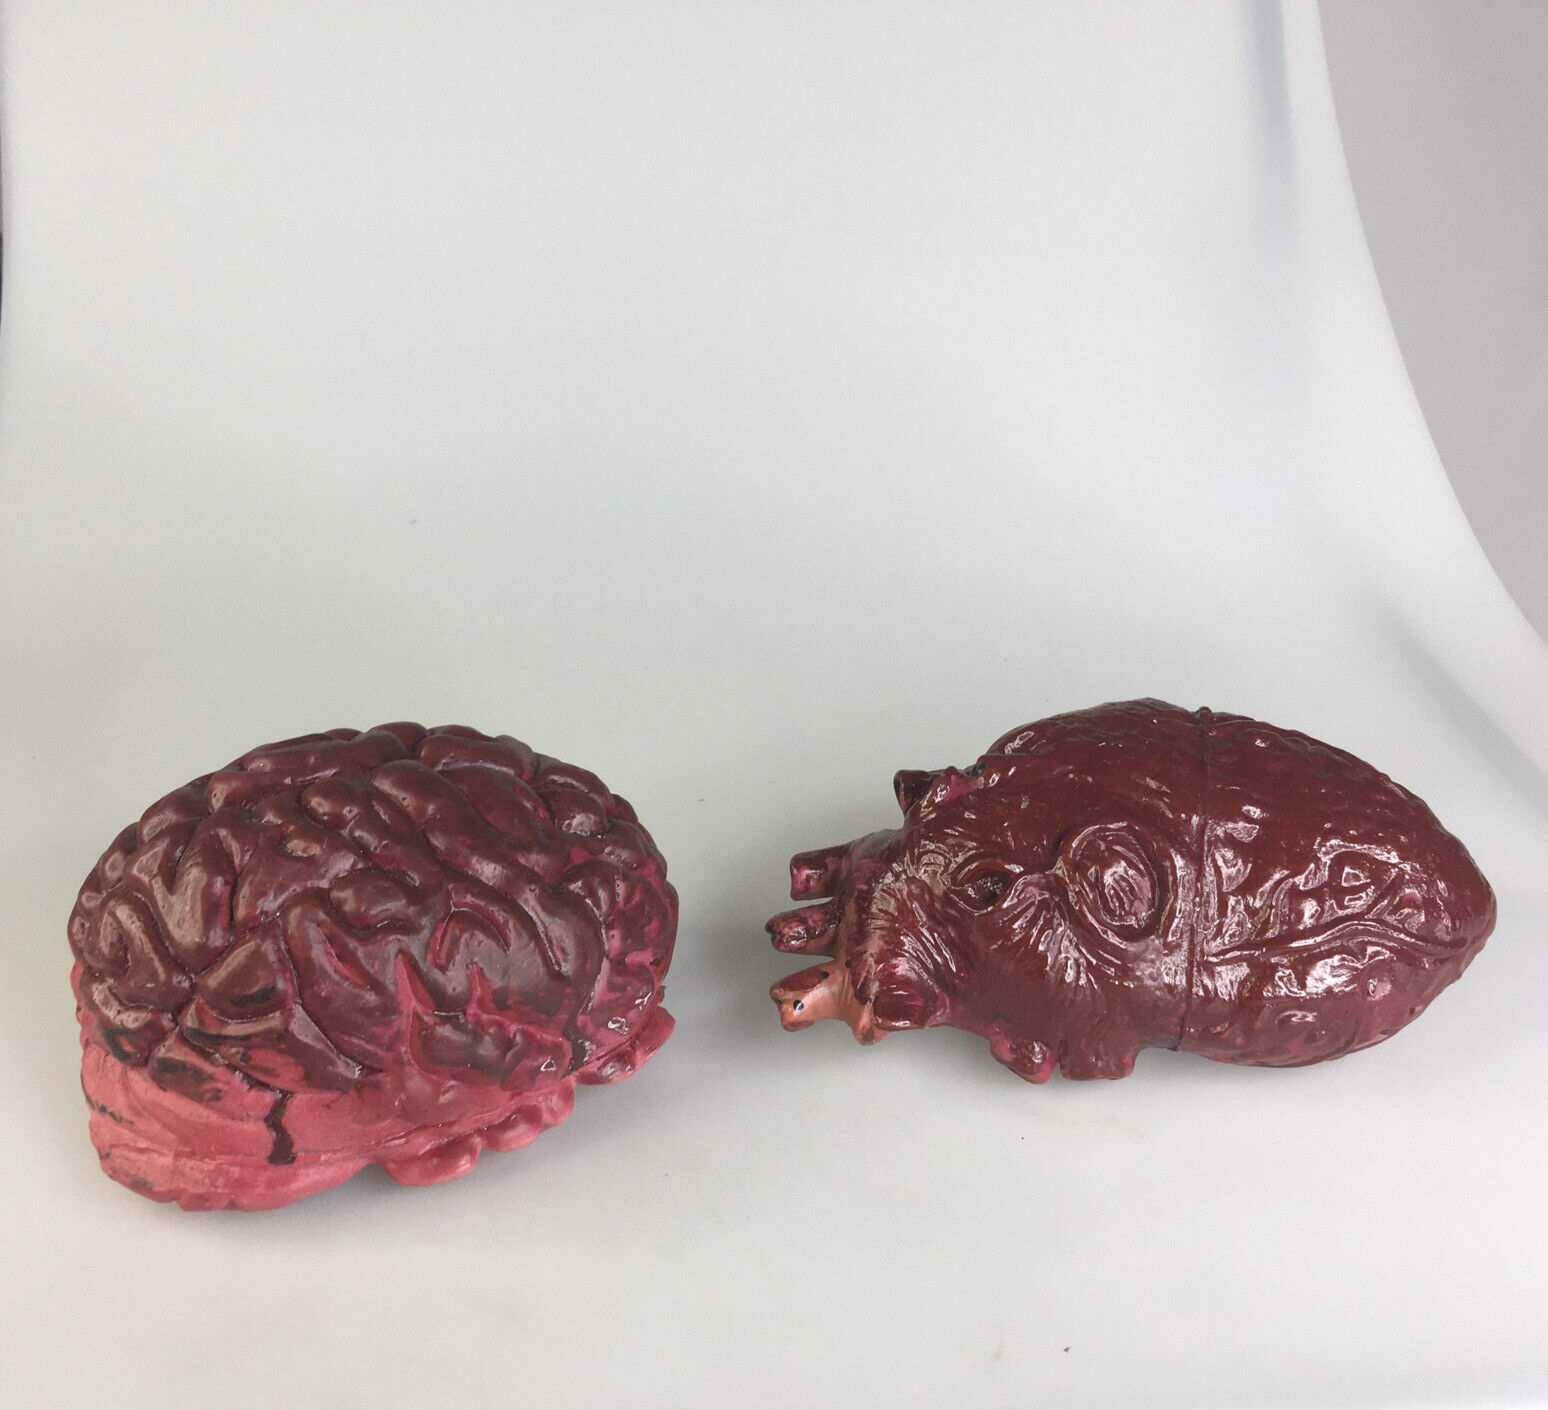 Halloween Brain and Heart Life Size Props Rubber Bloody Organs Lab Remains